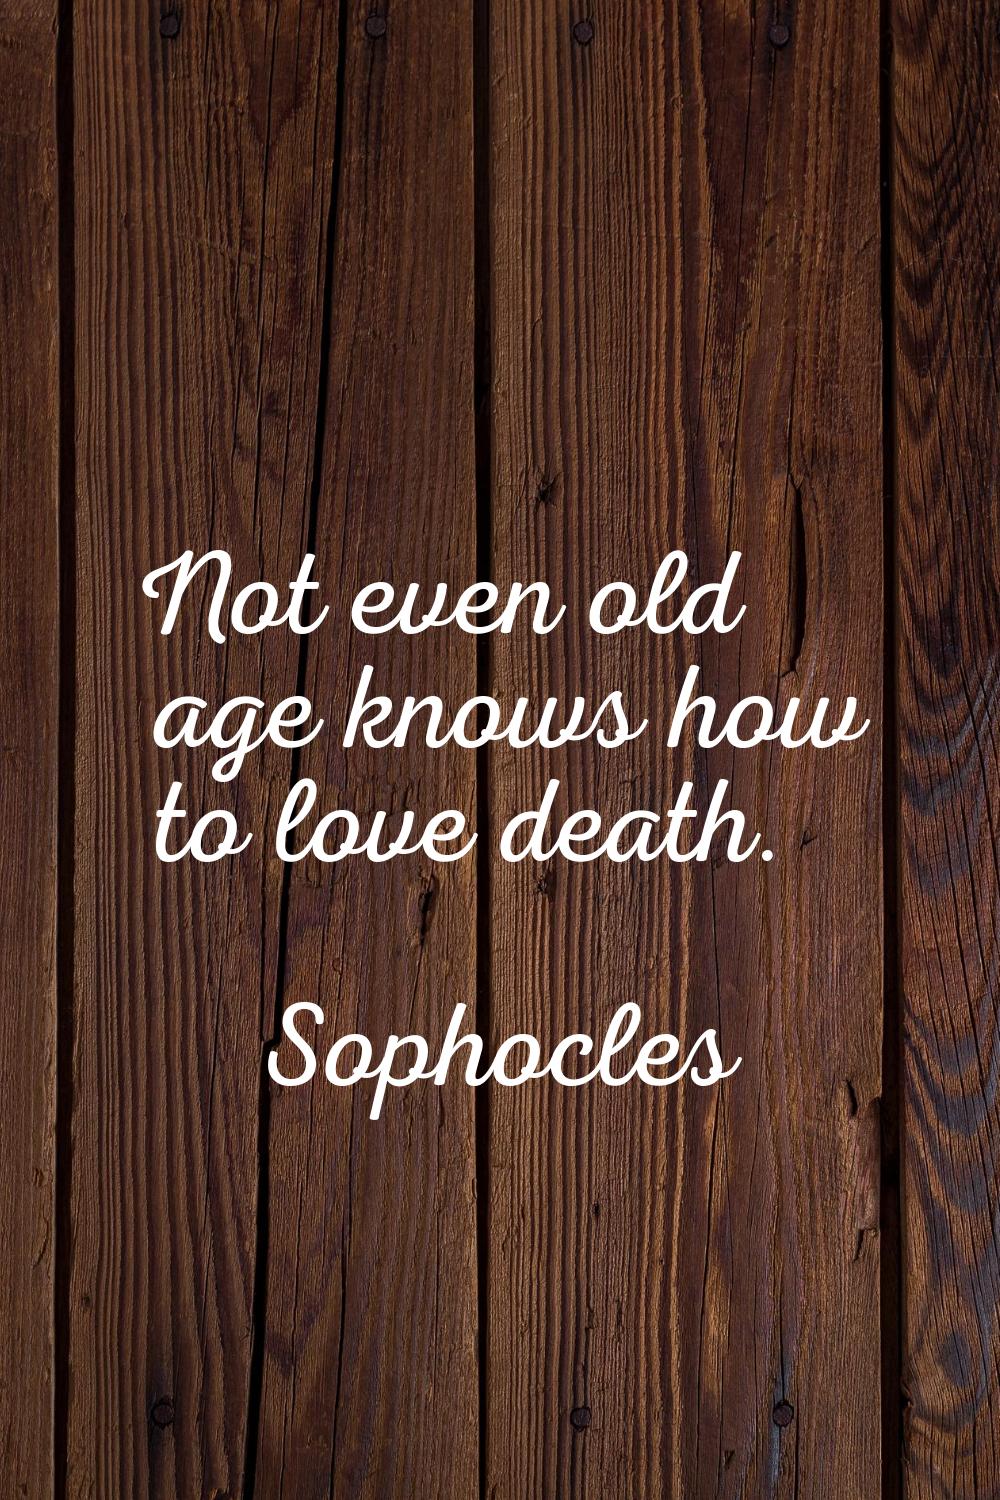 Not even old age knows how to love death.